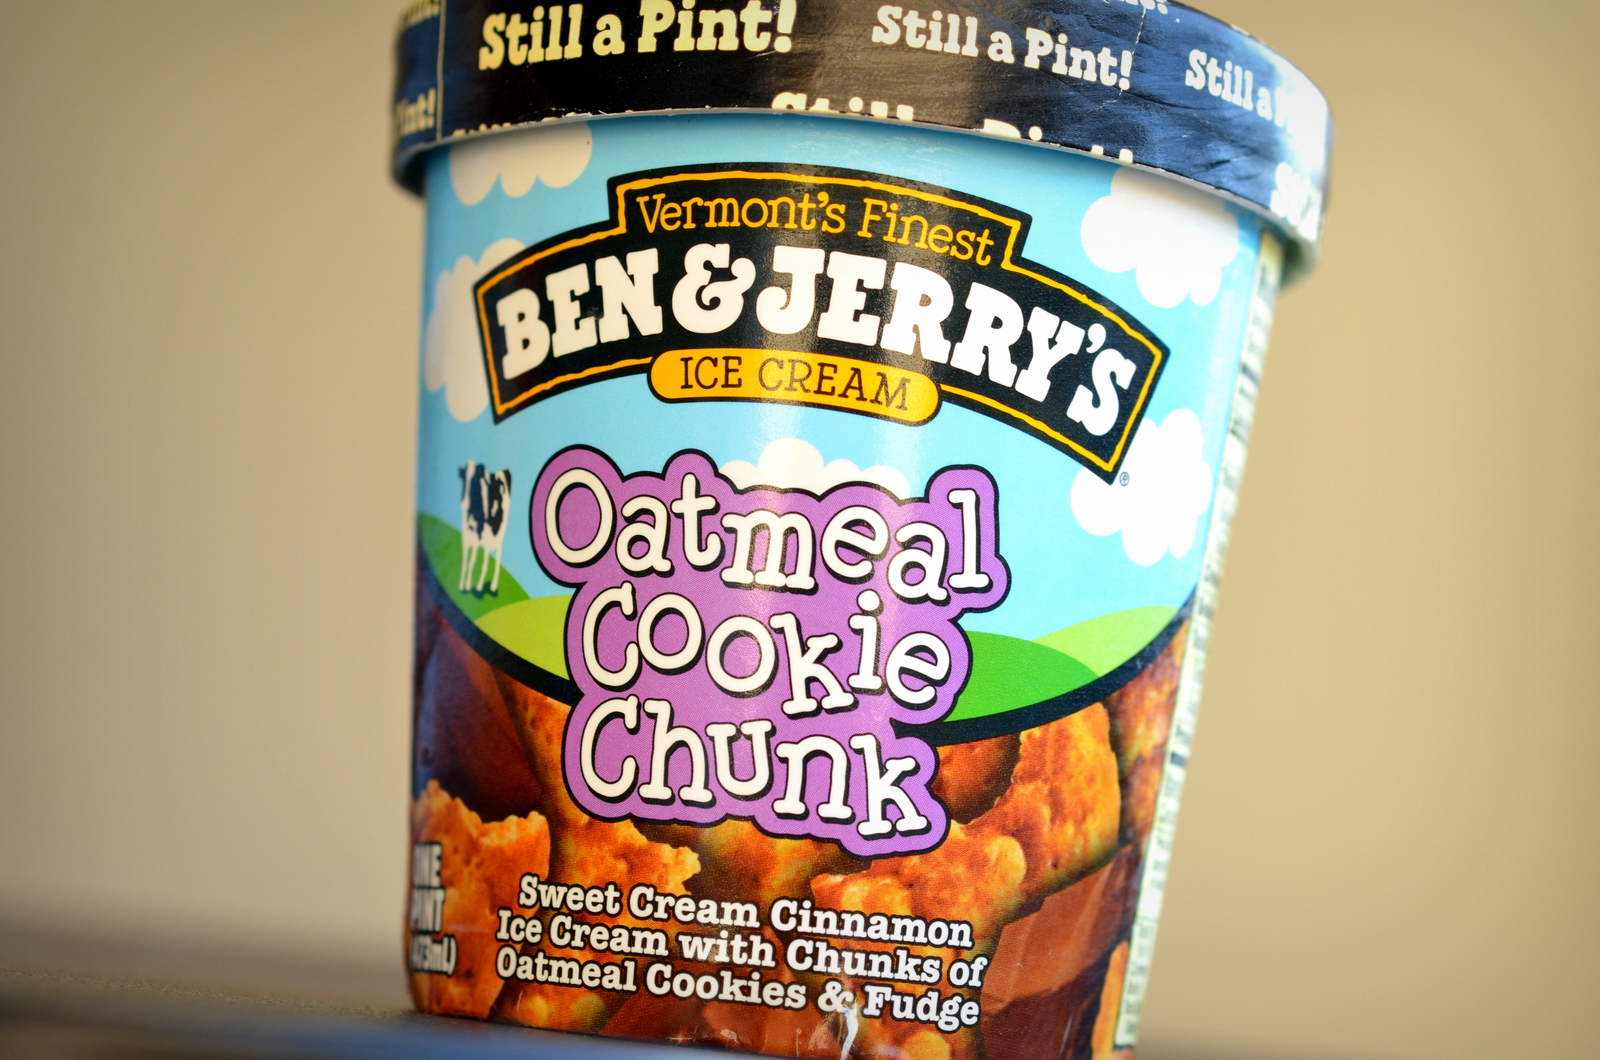 Discontinued Foods - oatmeal cookie chunk ben and jerry's ice cream - Still a Pint! Stilla Pint! stilla Vermont's Finest Ice Cream Bengjerays Oatmeal Cookie Chunk Sweet Cream Cinnamon Ice Cream with Chunks of G0 Oatmeal Cookies & Fudge